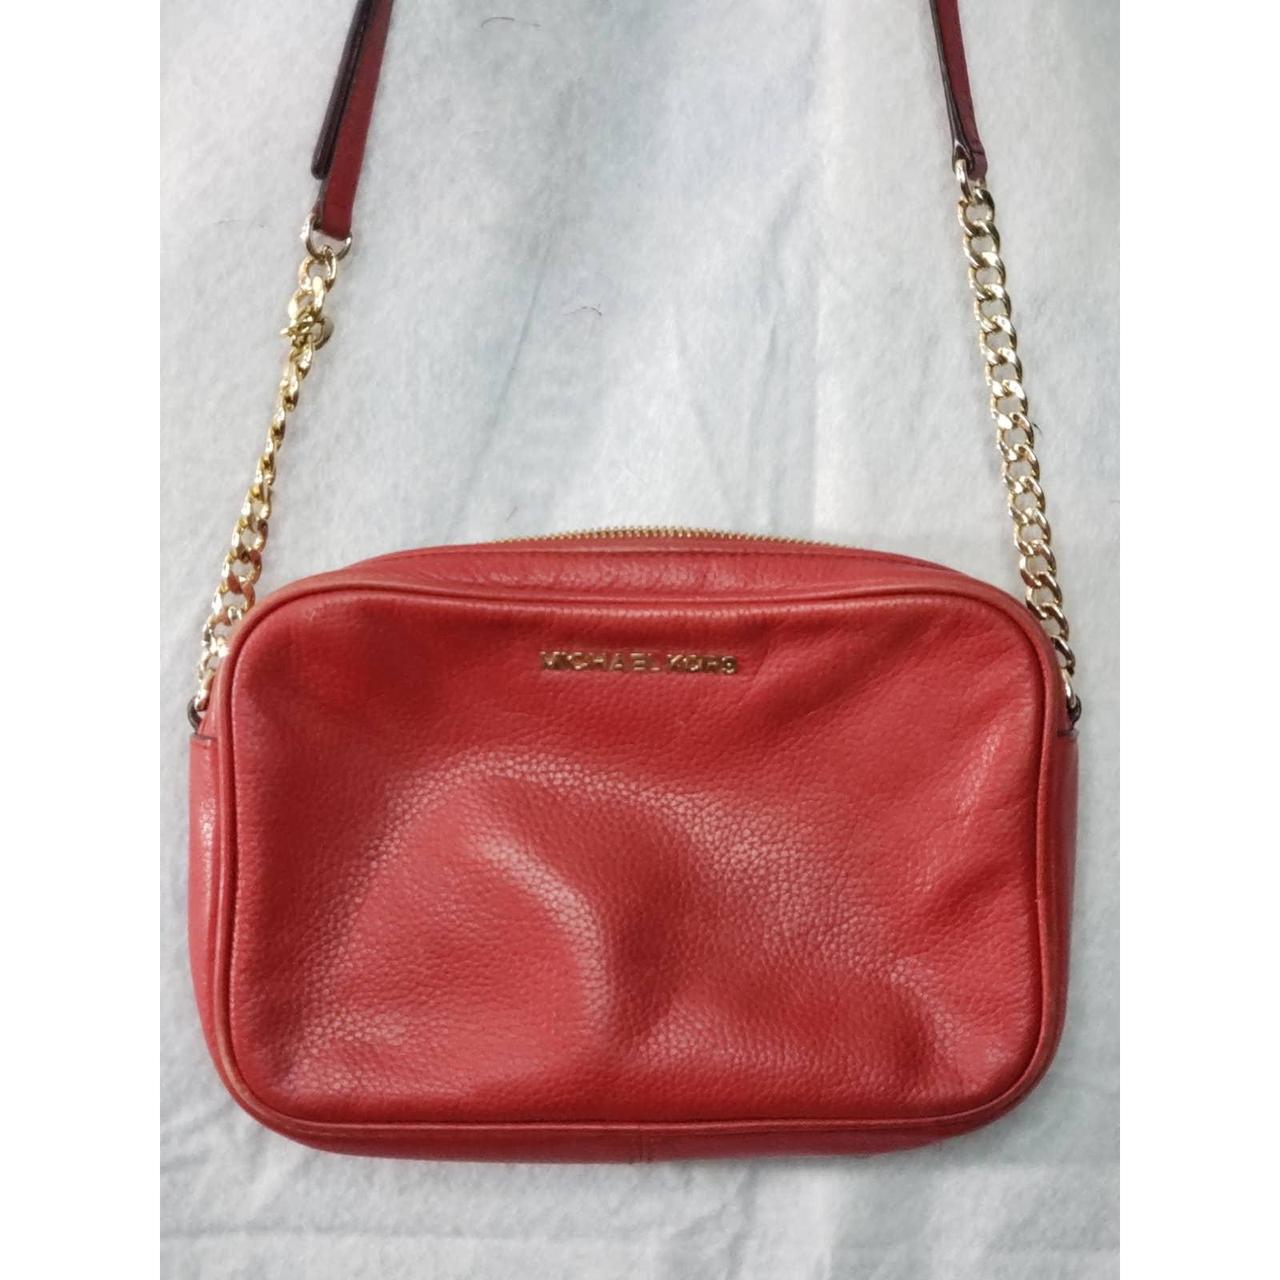 Michael Kors, Bags, Michael Kors Red Purse Two Straps Gold Chain